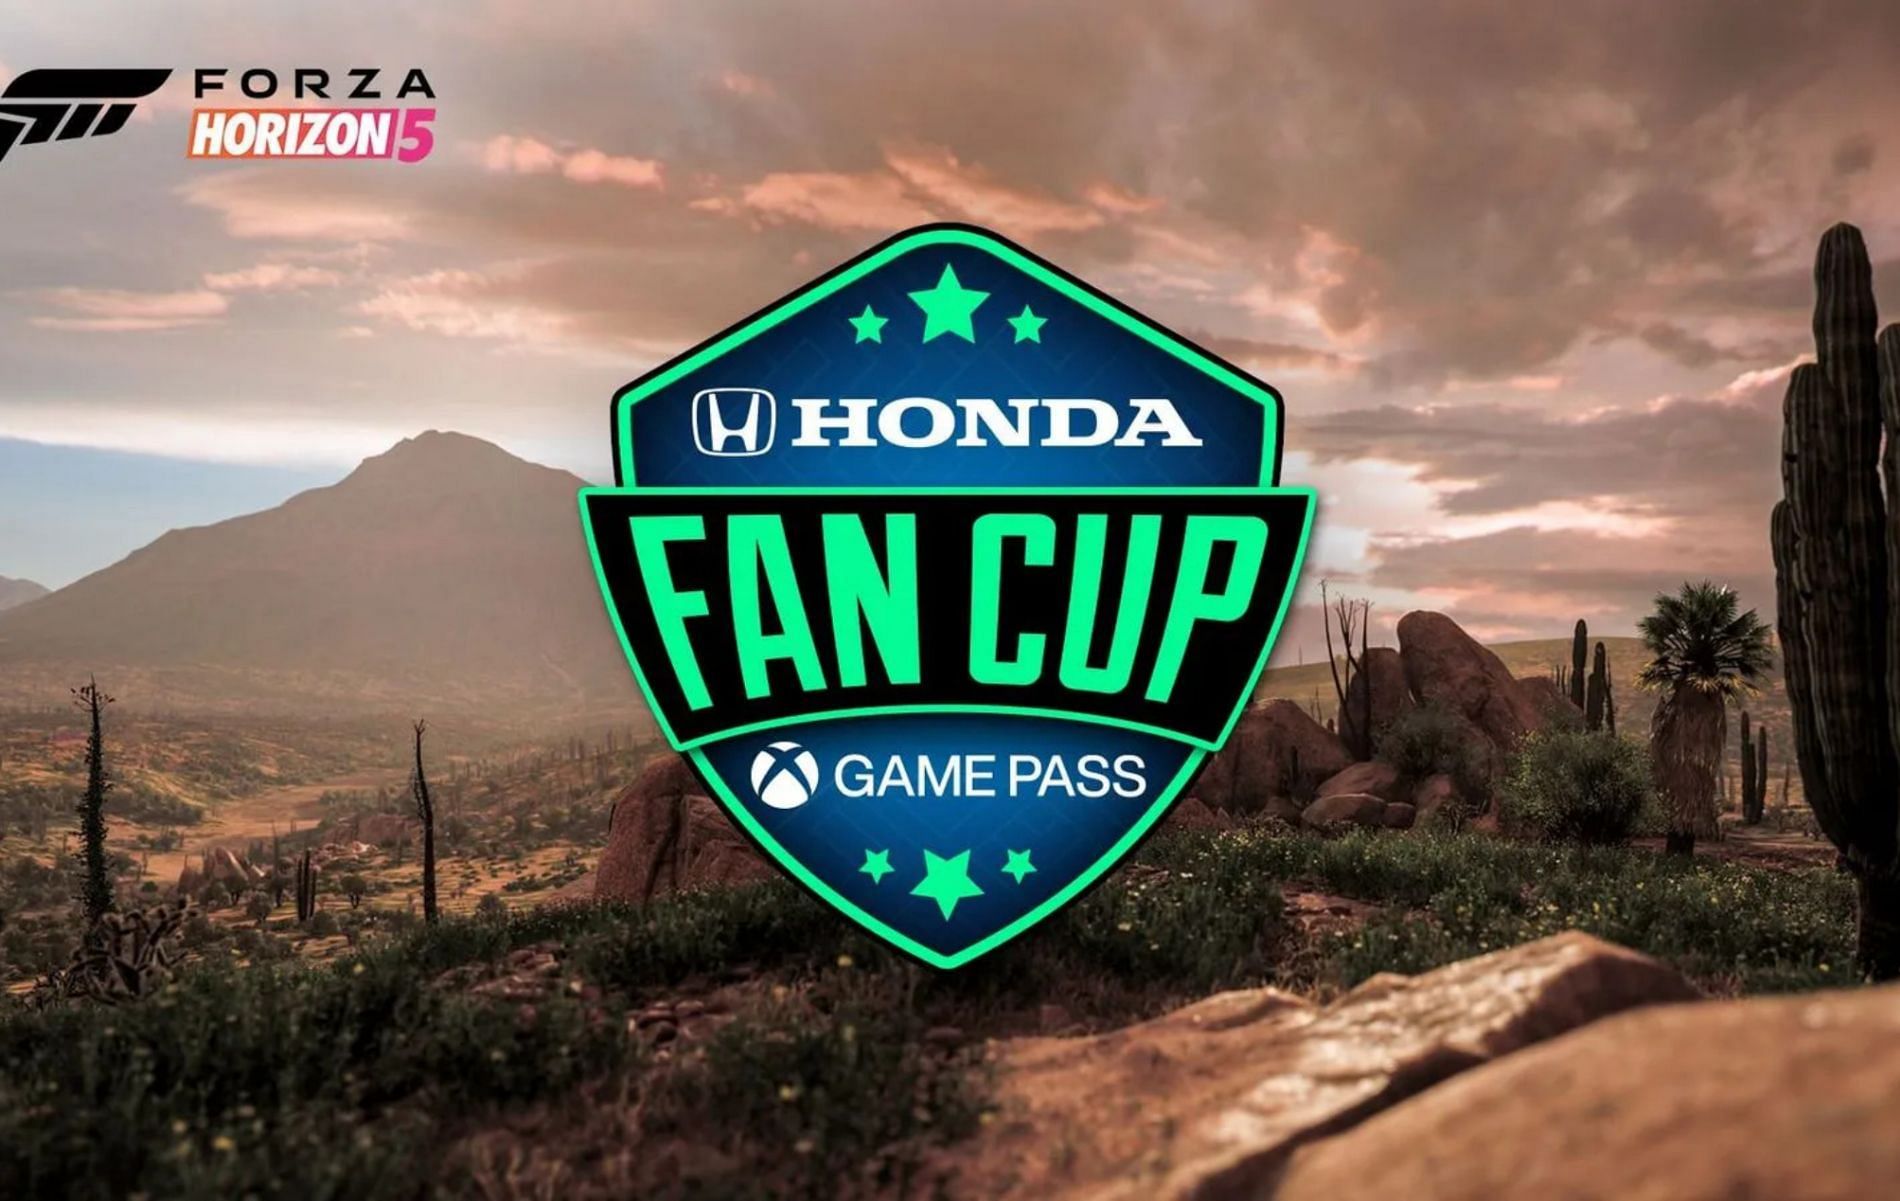 What to expect from the Forza Horizon 5 Honda Fan Cup 2022 event? (Image via Honda Fan Cup)